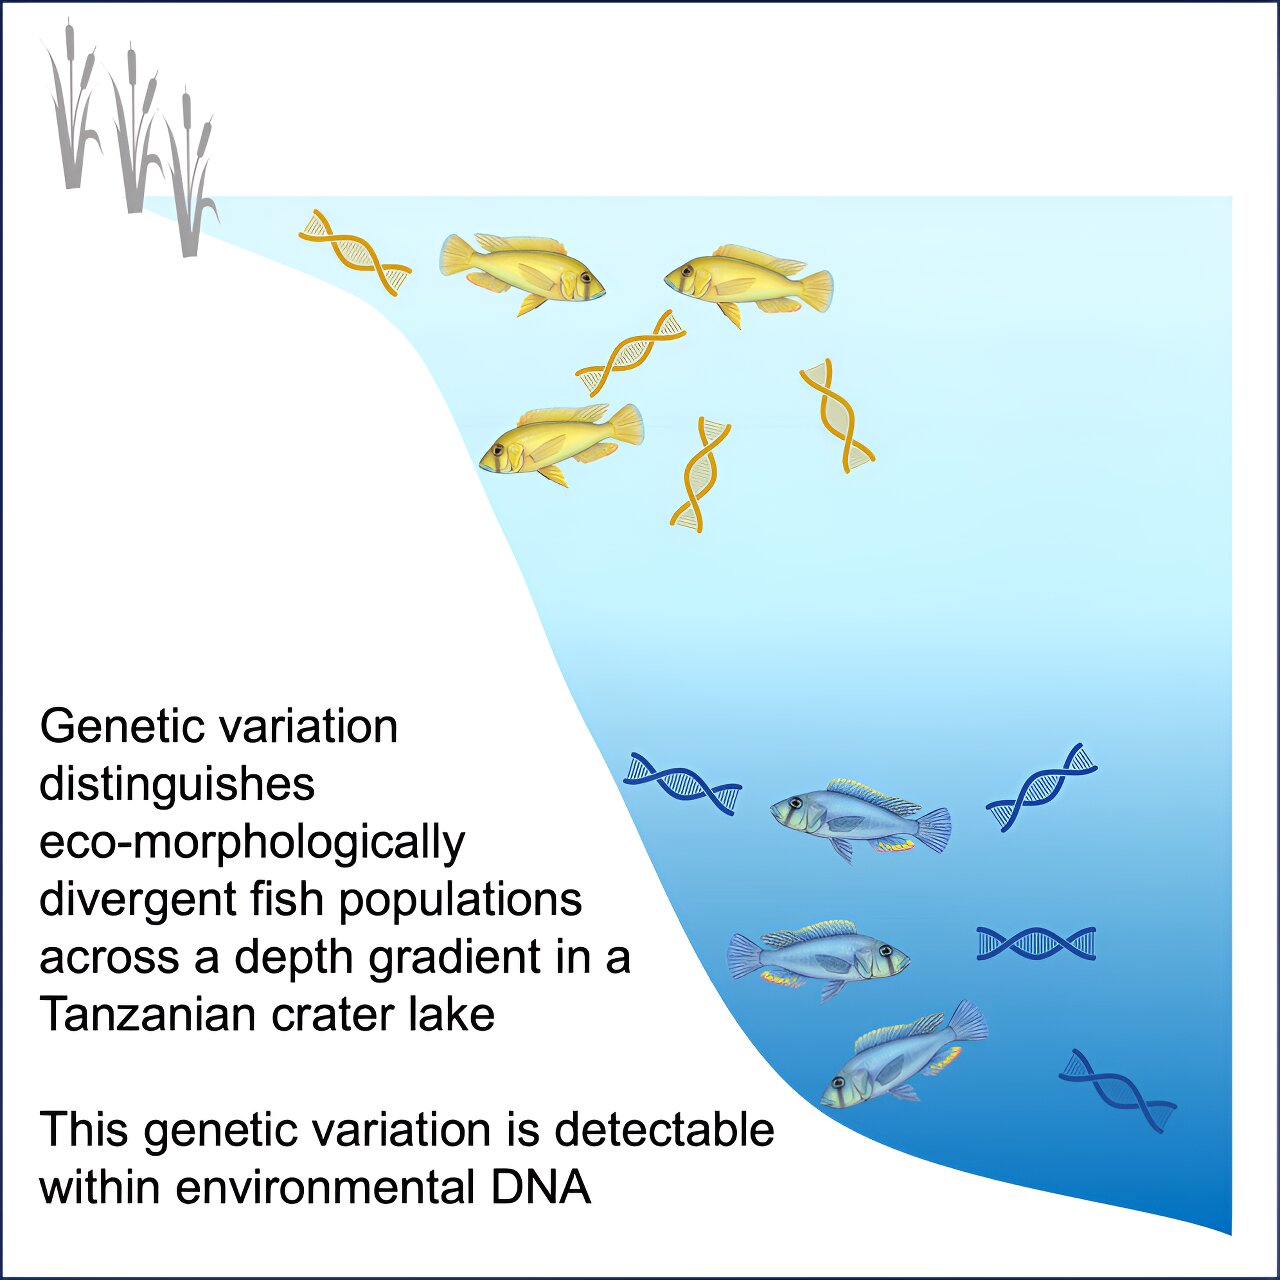 A new technology detects distinct fish populations in a single lake through their environmental DNA